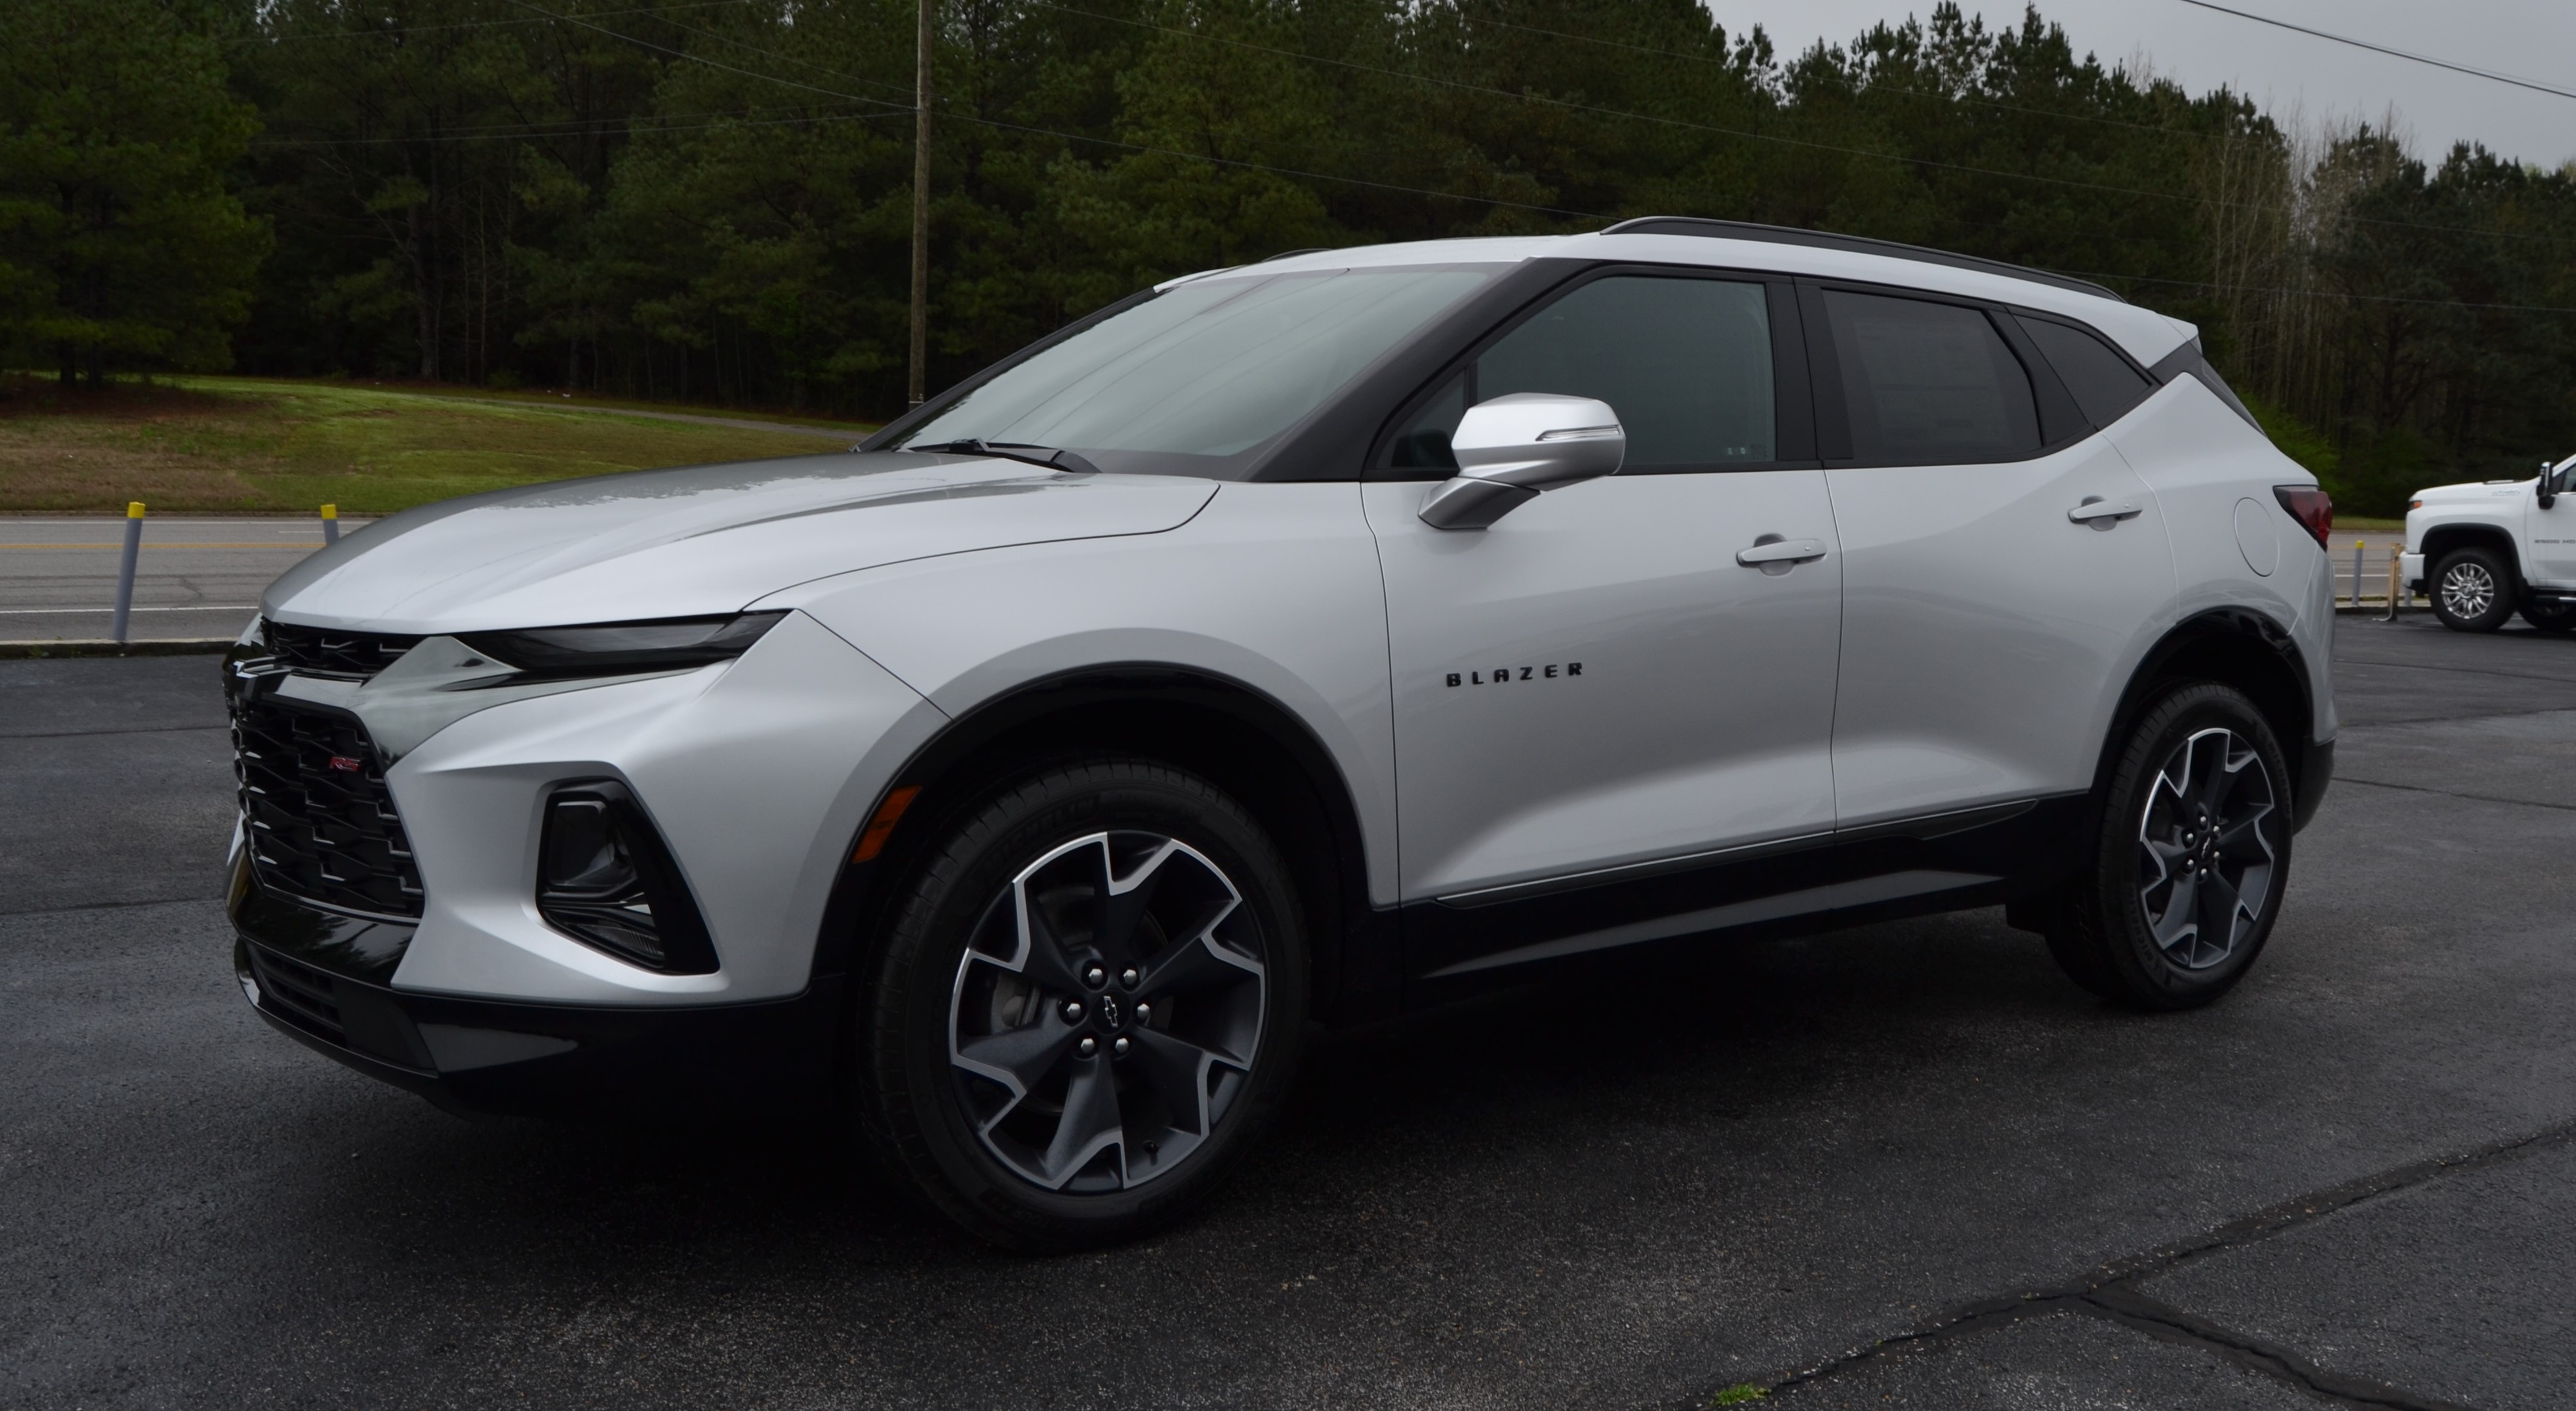 New 2020 Chevrolet Blazer Rs Front Wheel Drive Crossover